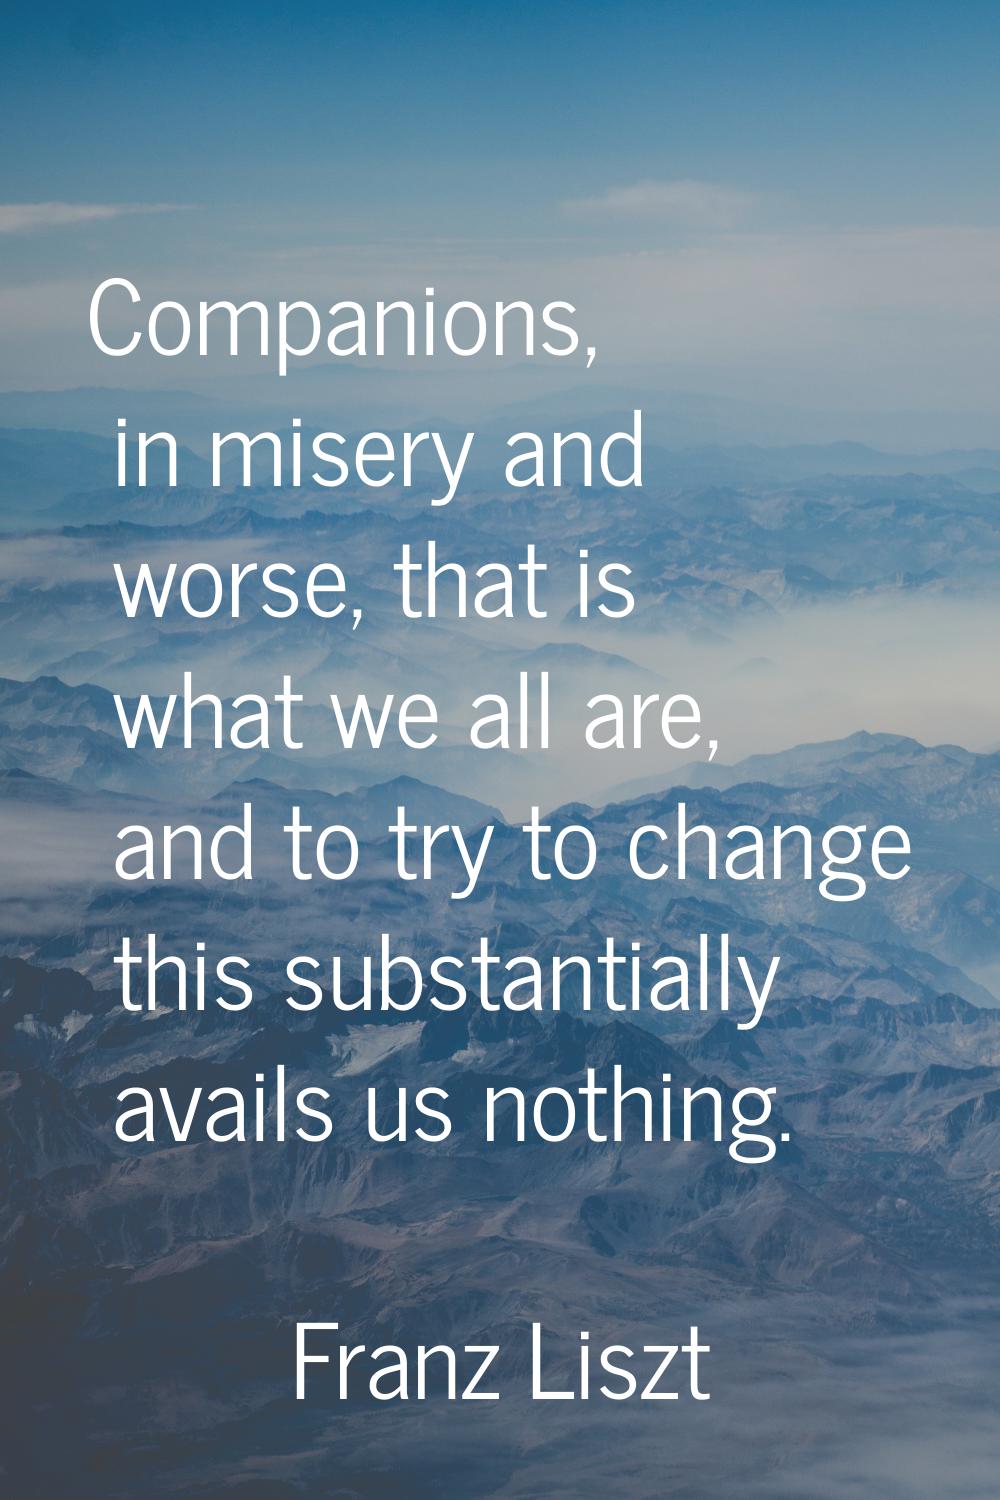 Companions, in misery and worse, that is what we all are, and to try to change this substantially a